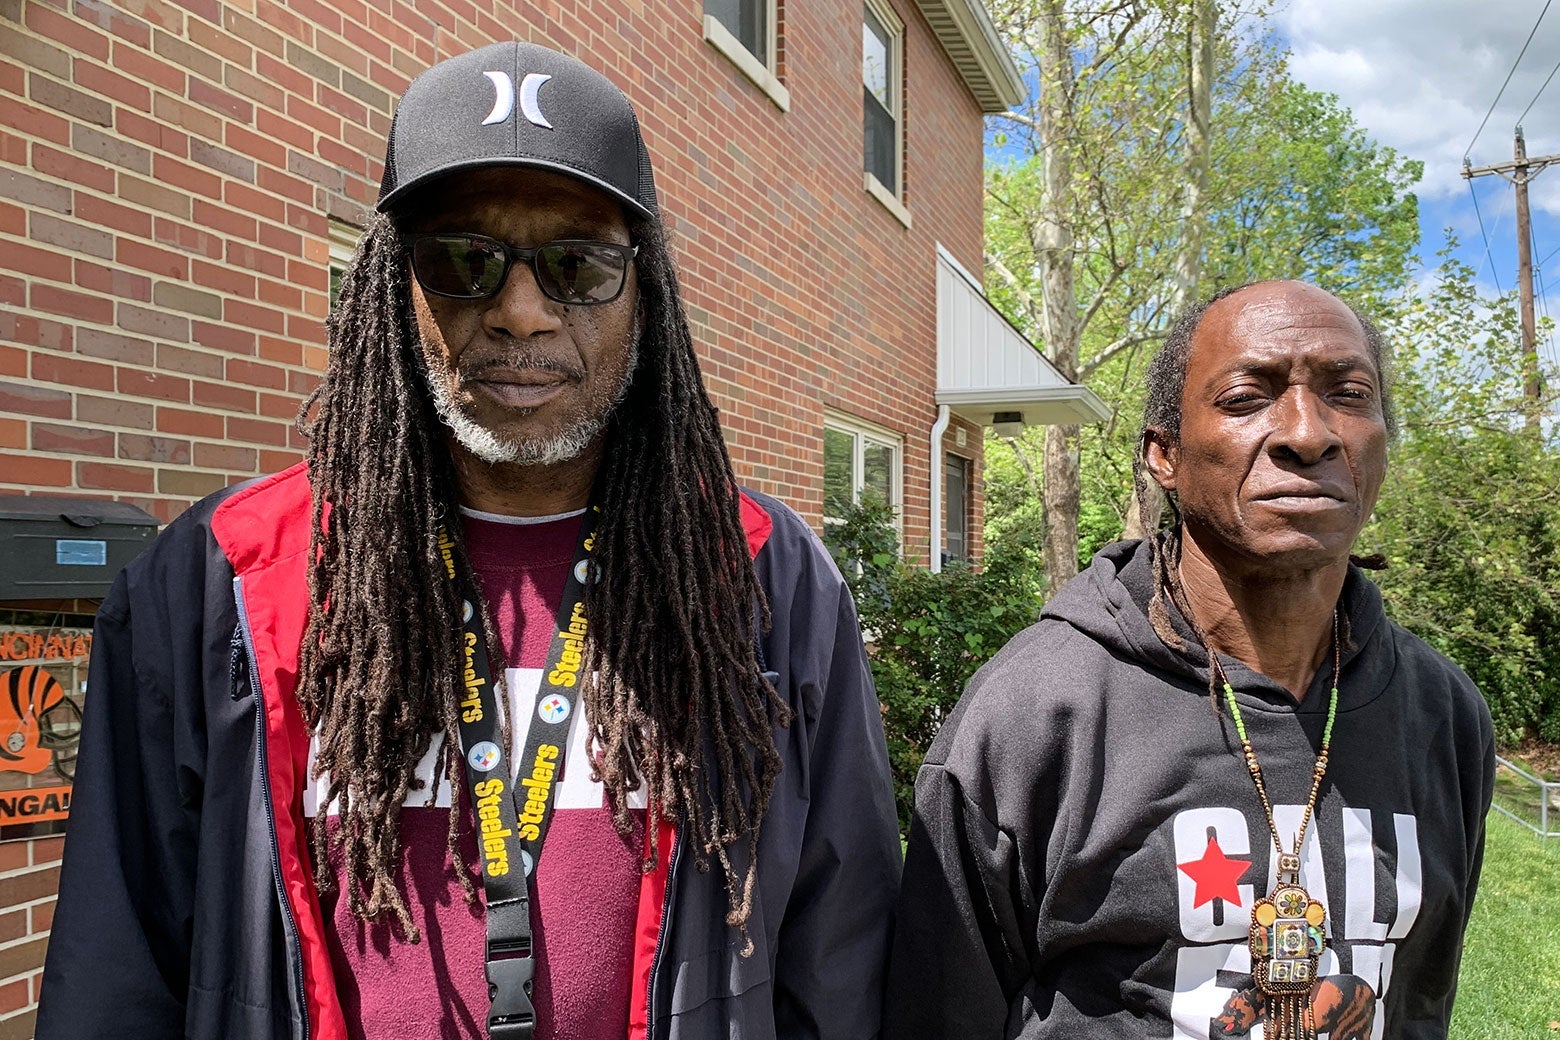 Two Black men stand next to each other. One has long dreadlocks, sunglasses, and a Steelers lanyard. The other is wearing a colorful beaded necklace and a black sweatshirt.